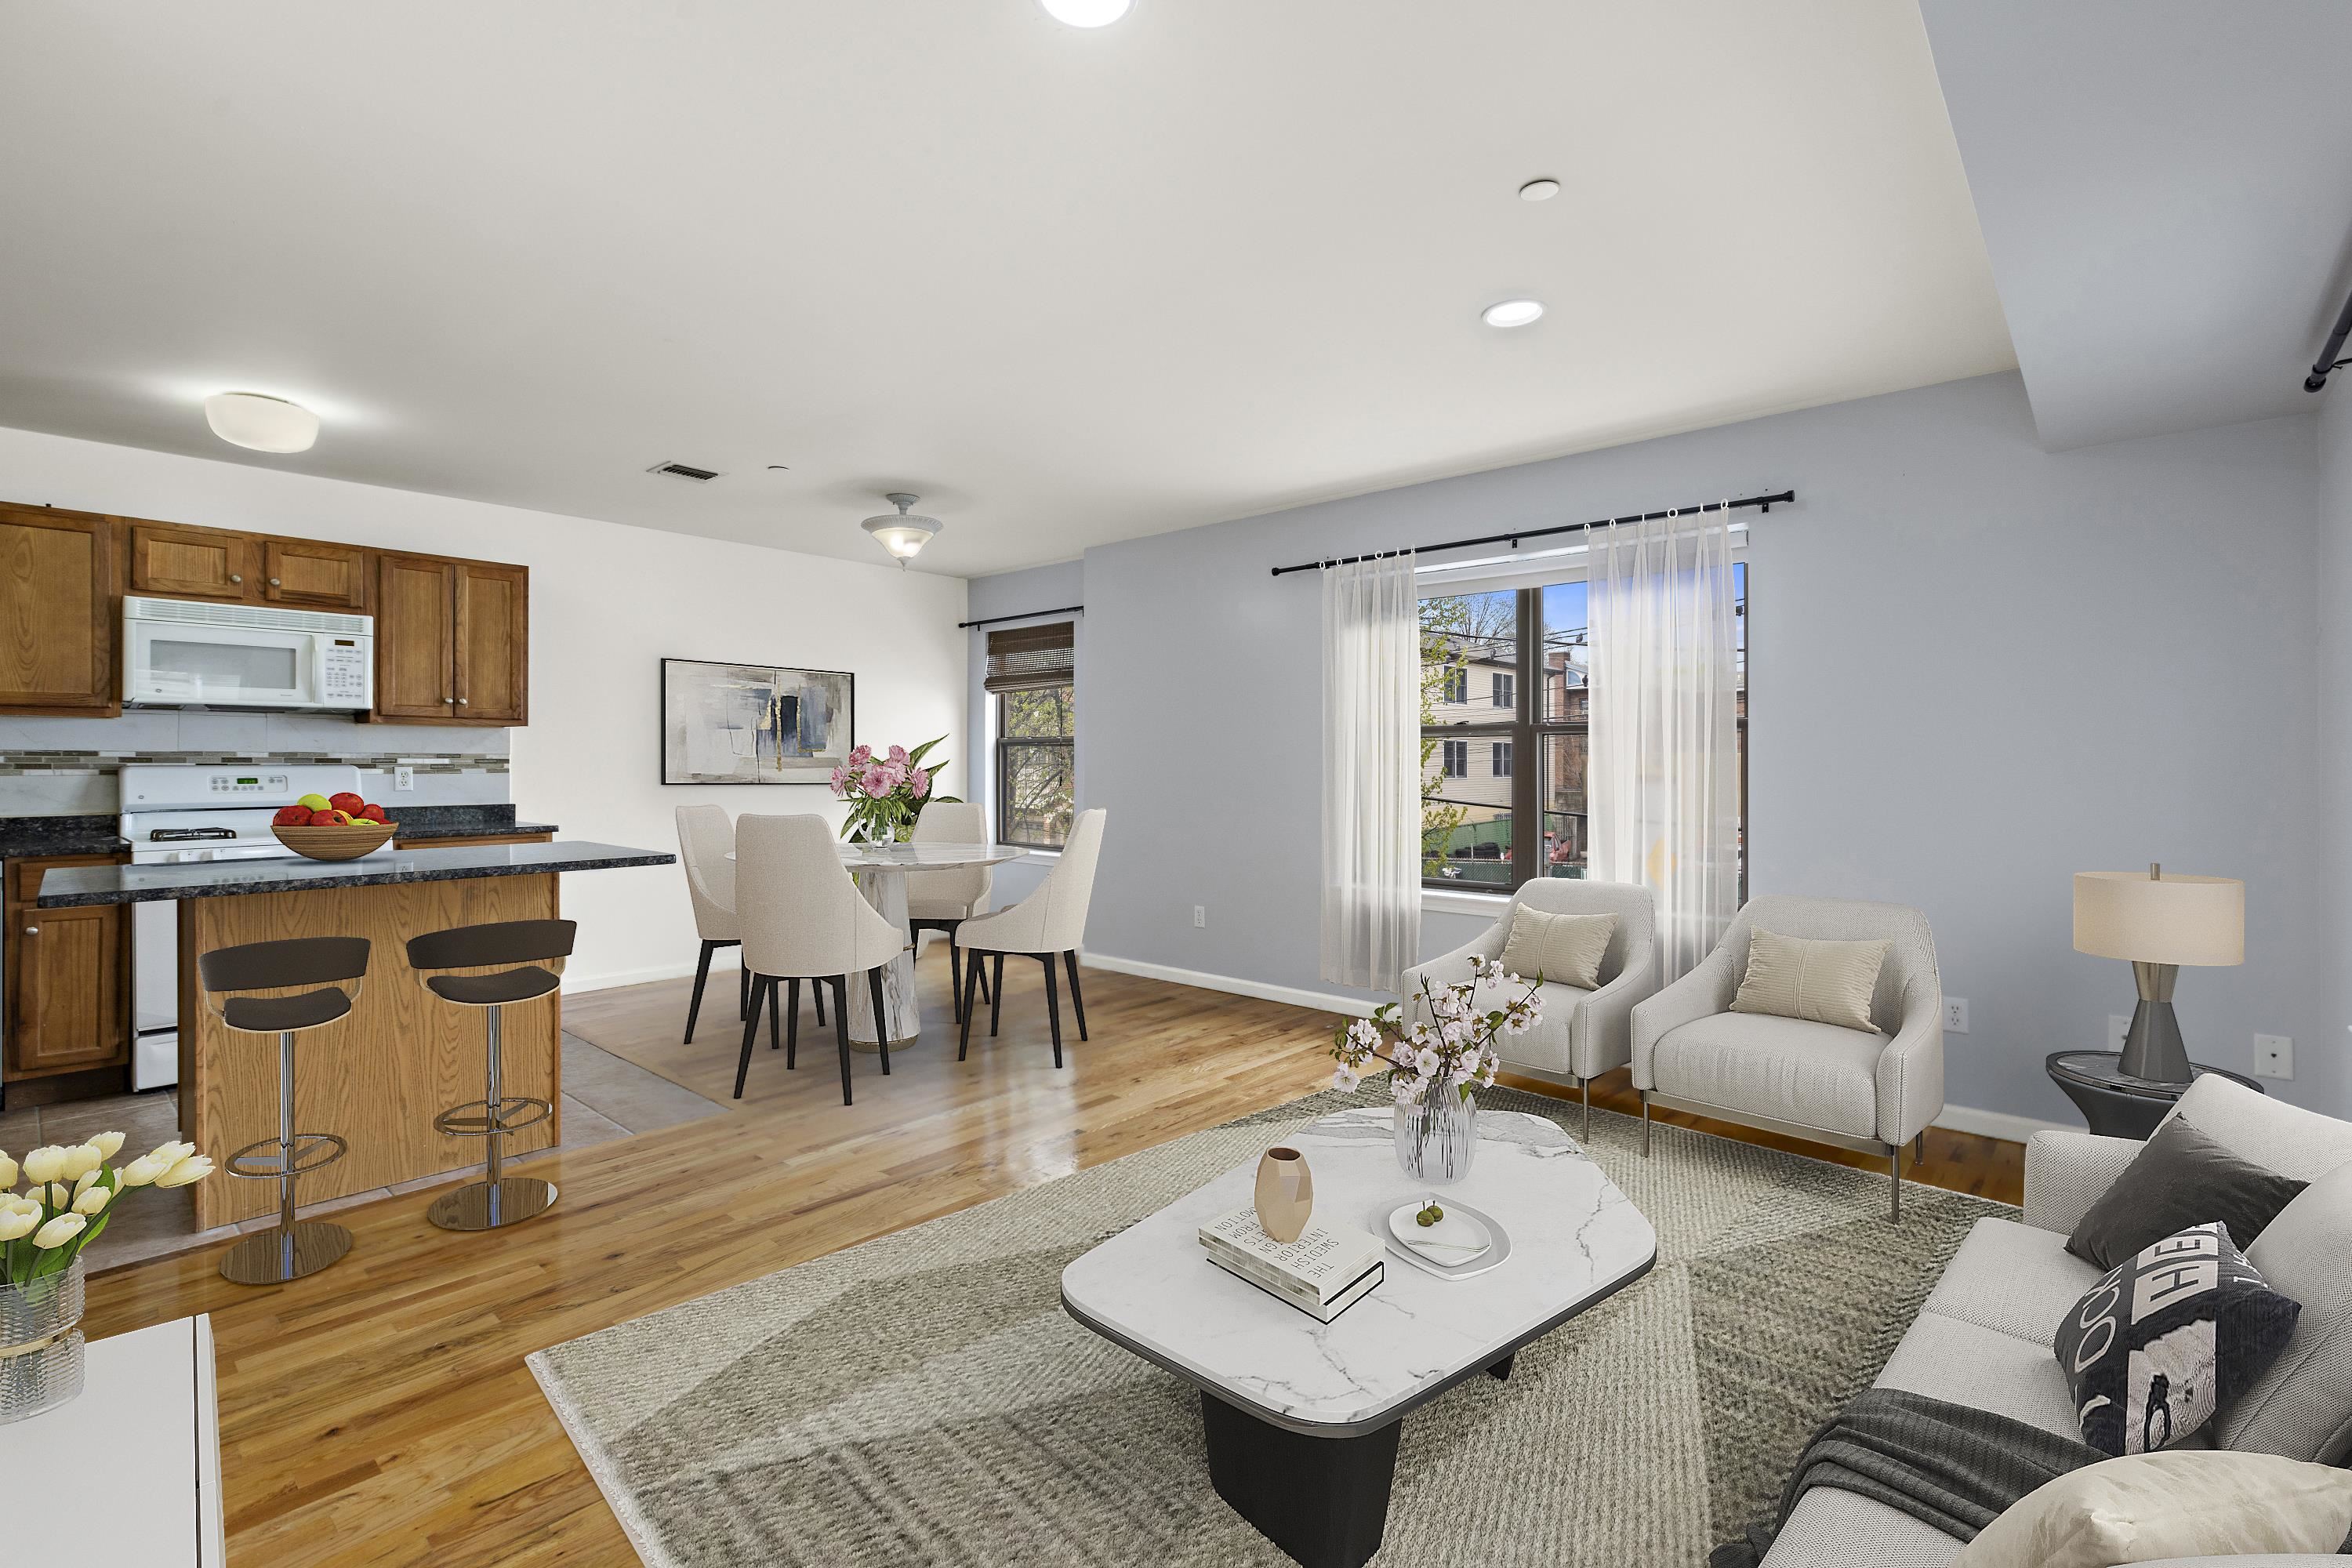 # 240005229 - For Rent in JERSEY CITY - Journal Square NJ